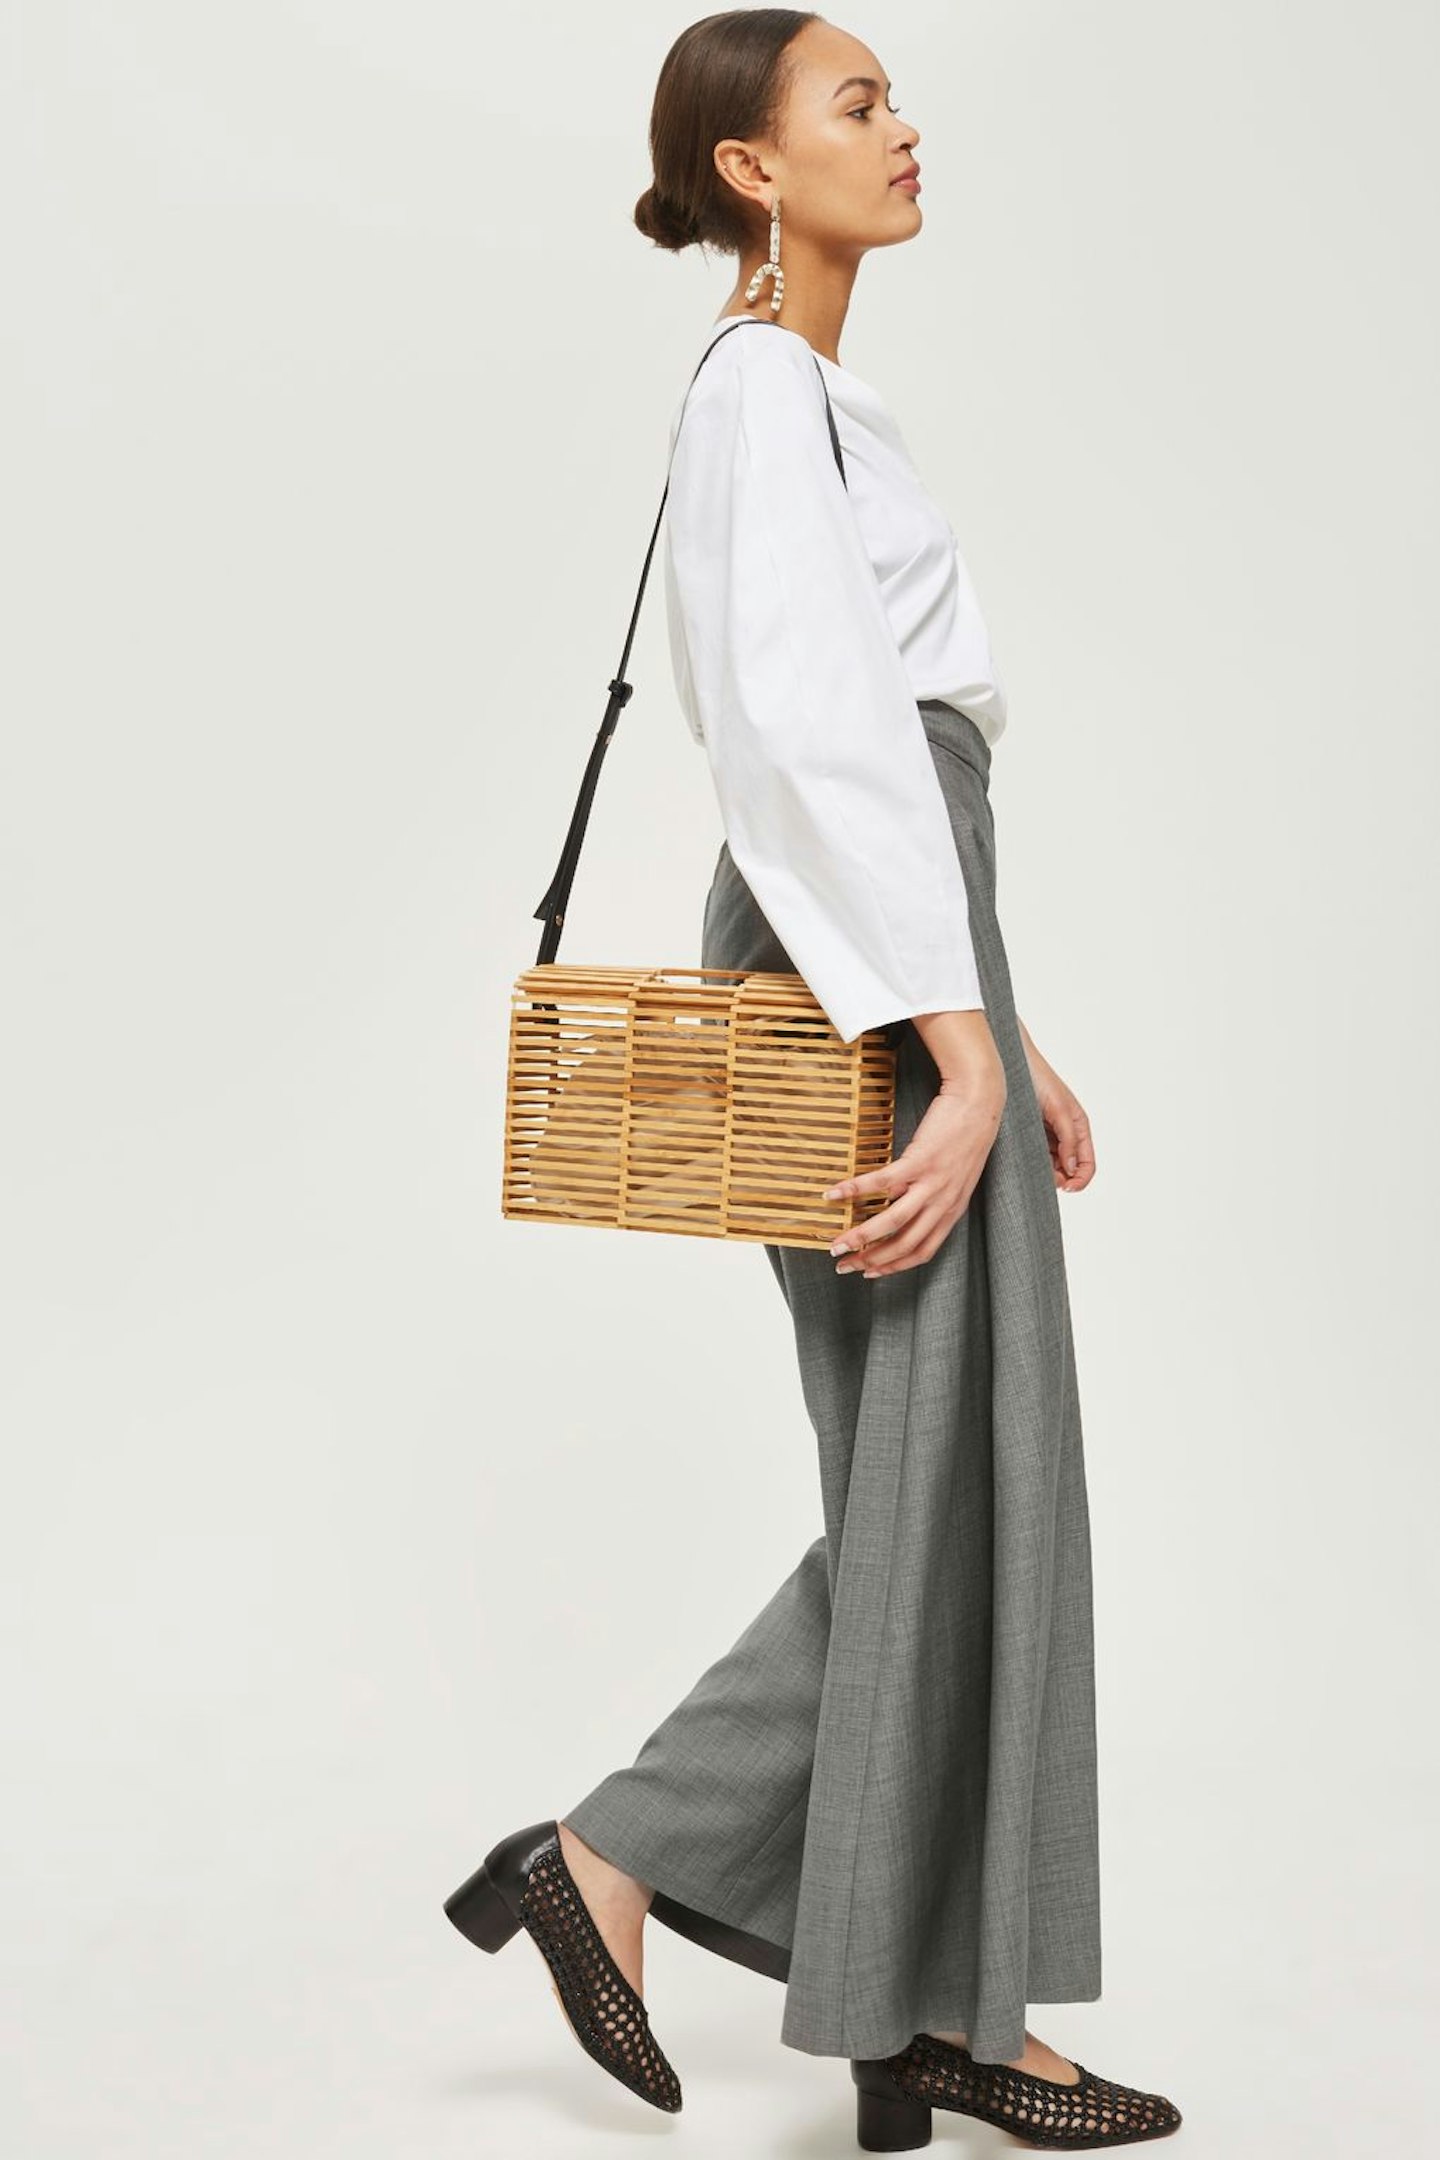 topshop wooden tote